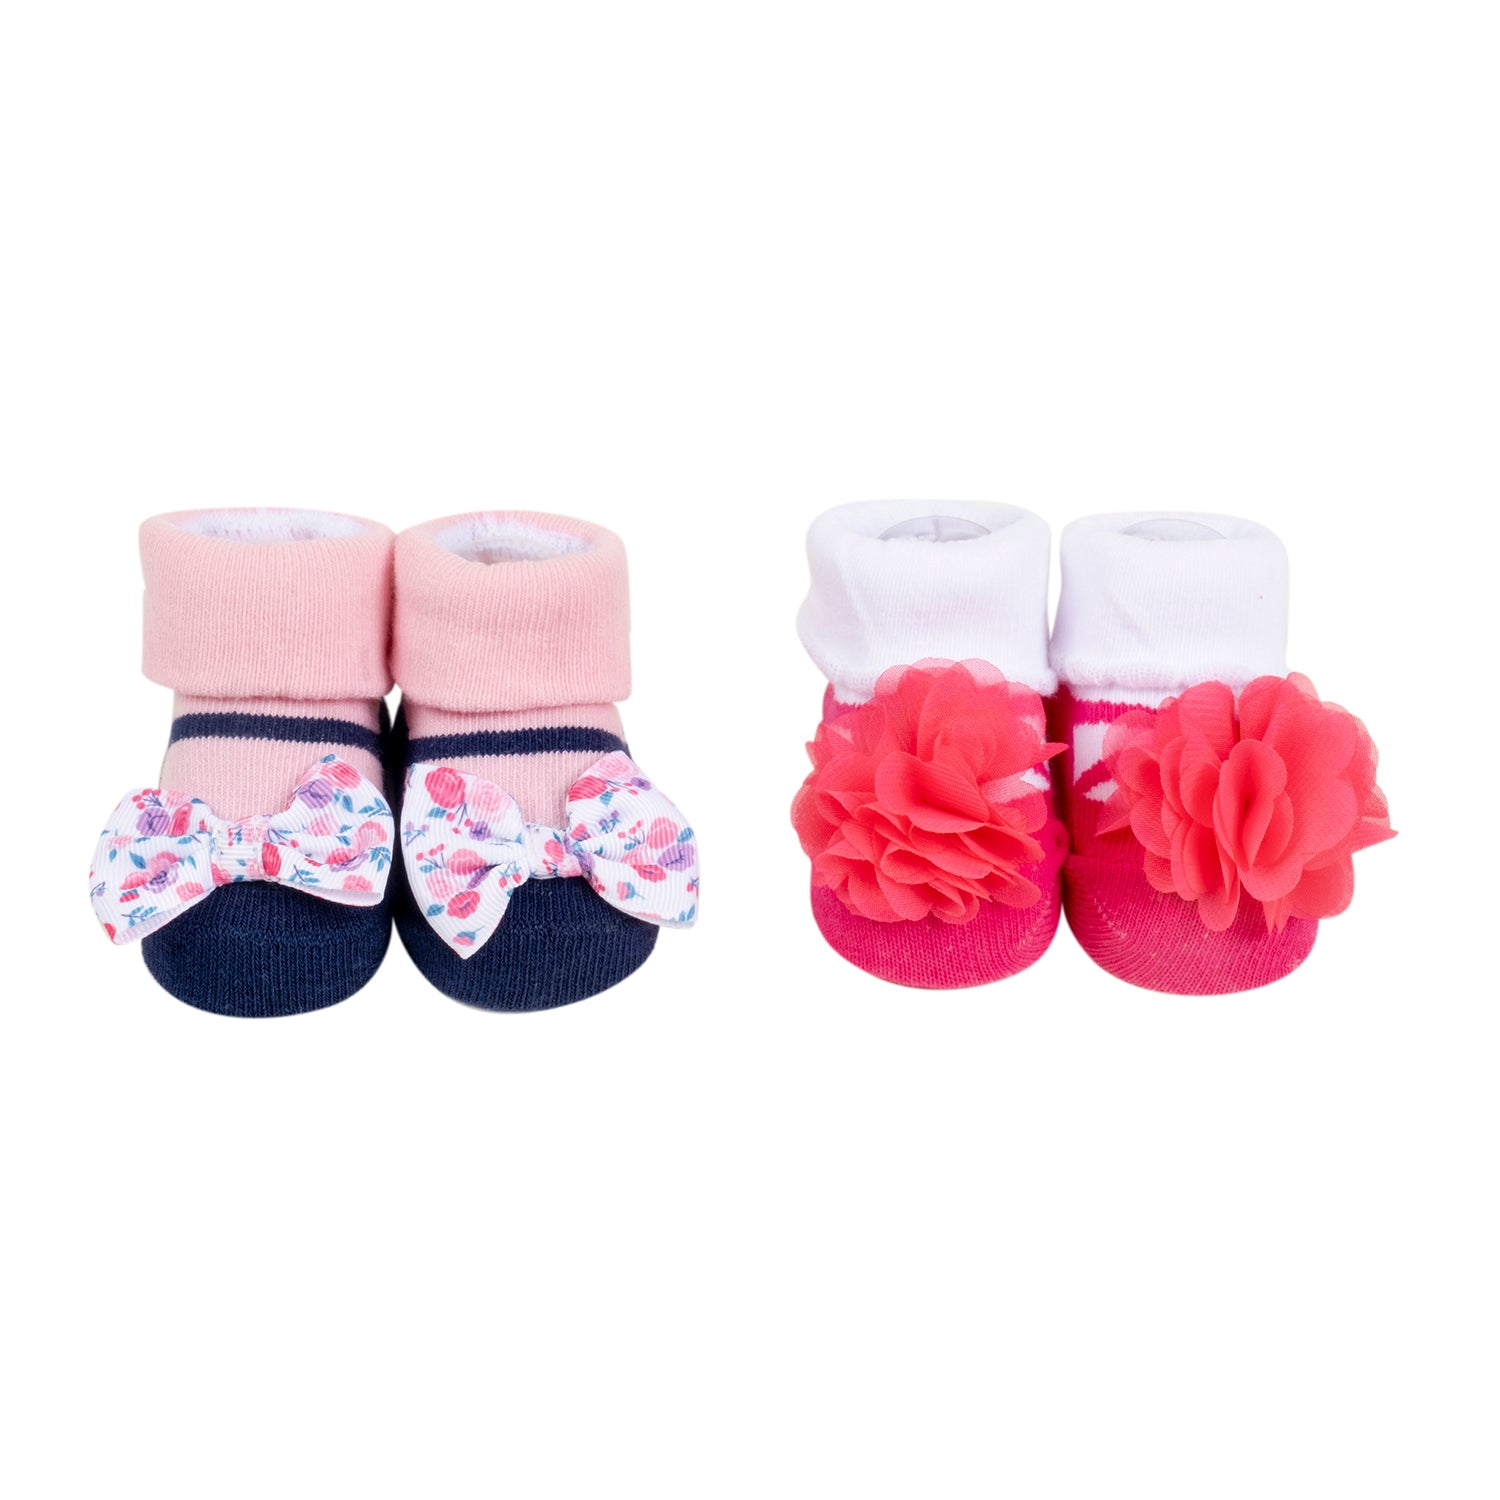 Baby Moo Ring a Ring o' Roses Infant Girl 4-Piece Gift Hairband And Socks Set - Pink